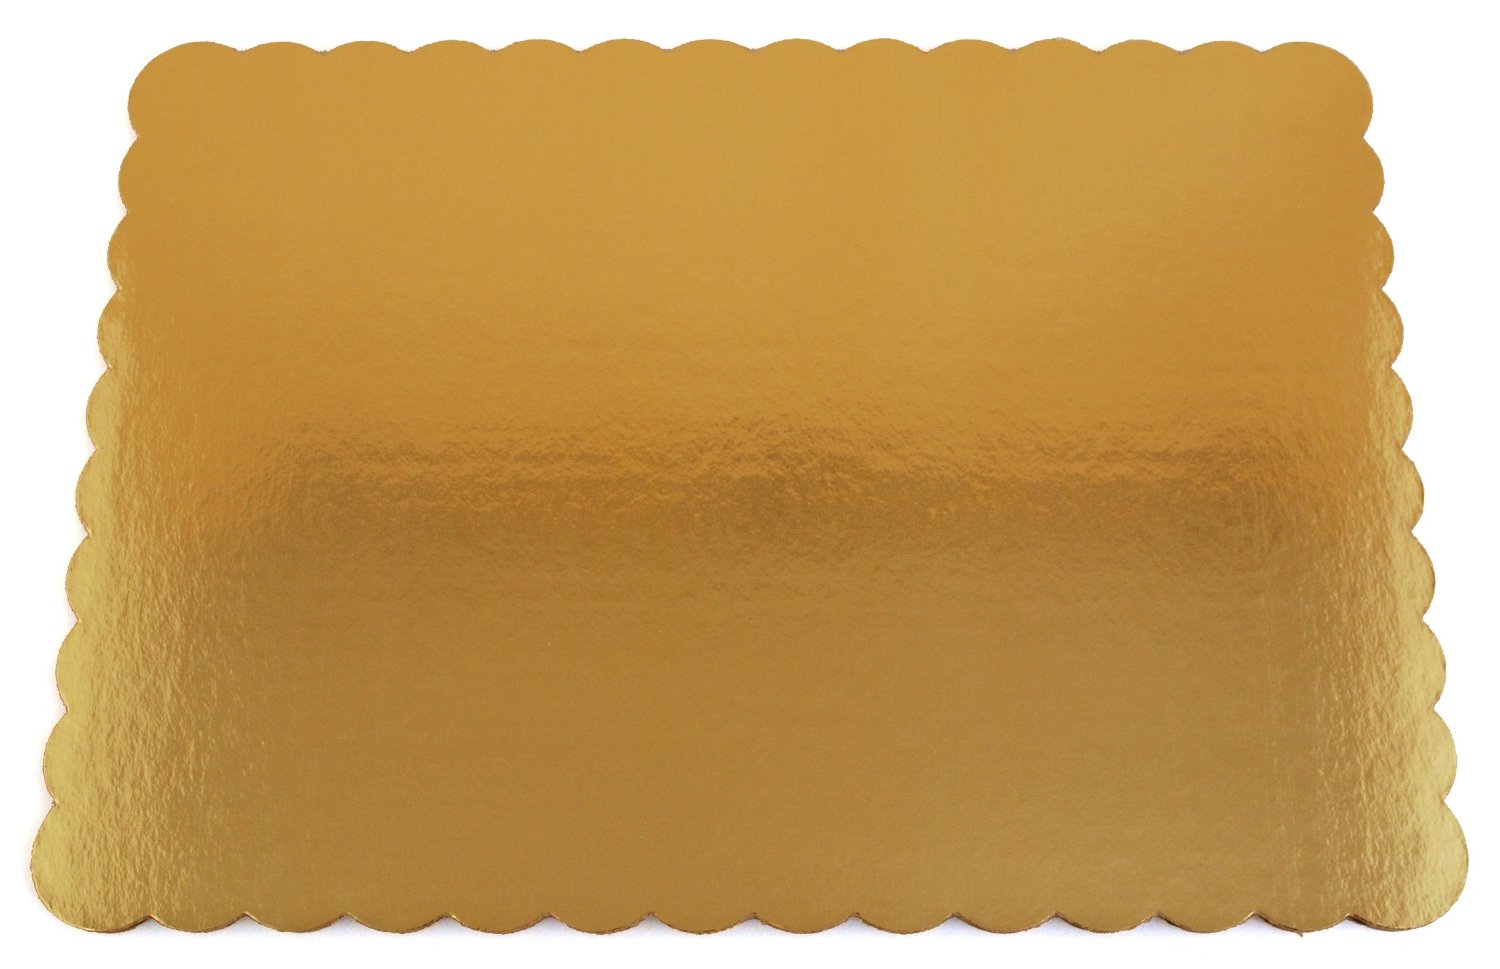 1665 Gold 19&quot;x14&quot; Double Wall
1/2 Sheet Pads - 25